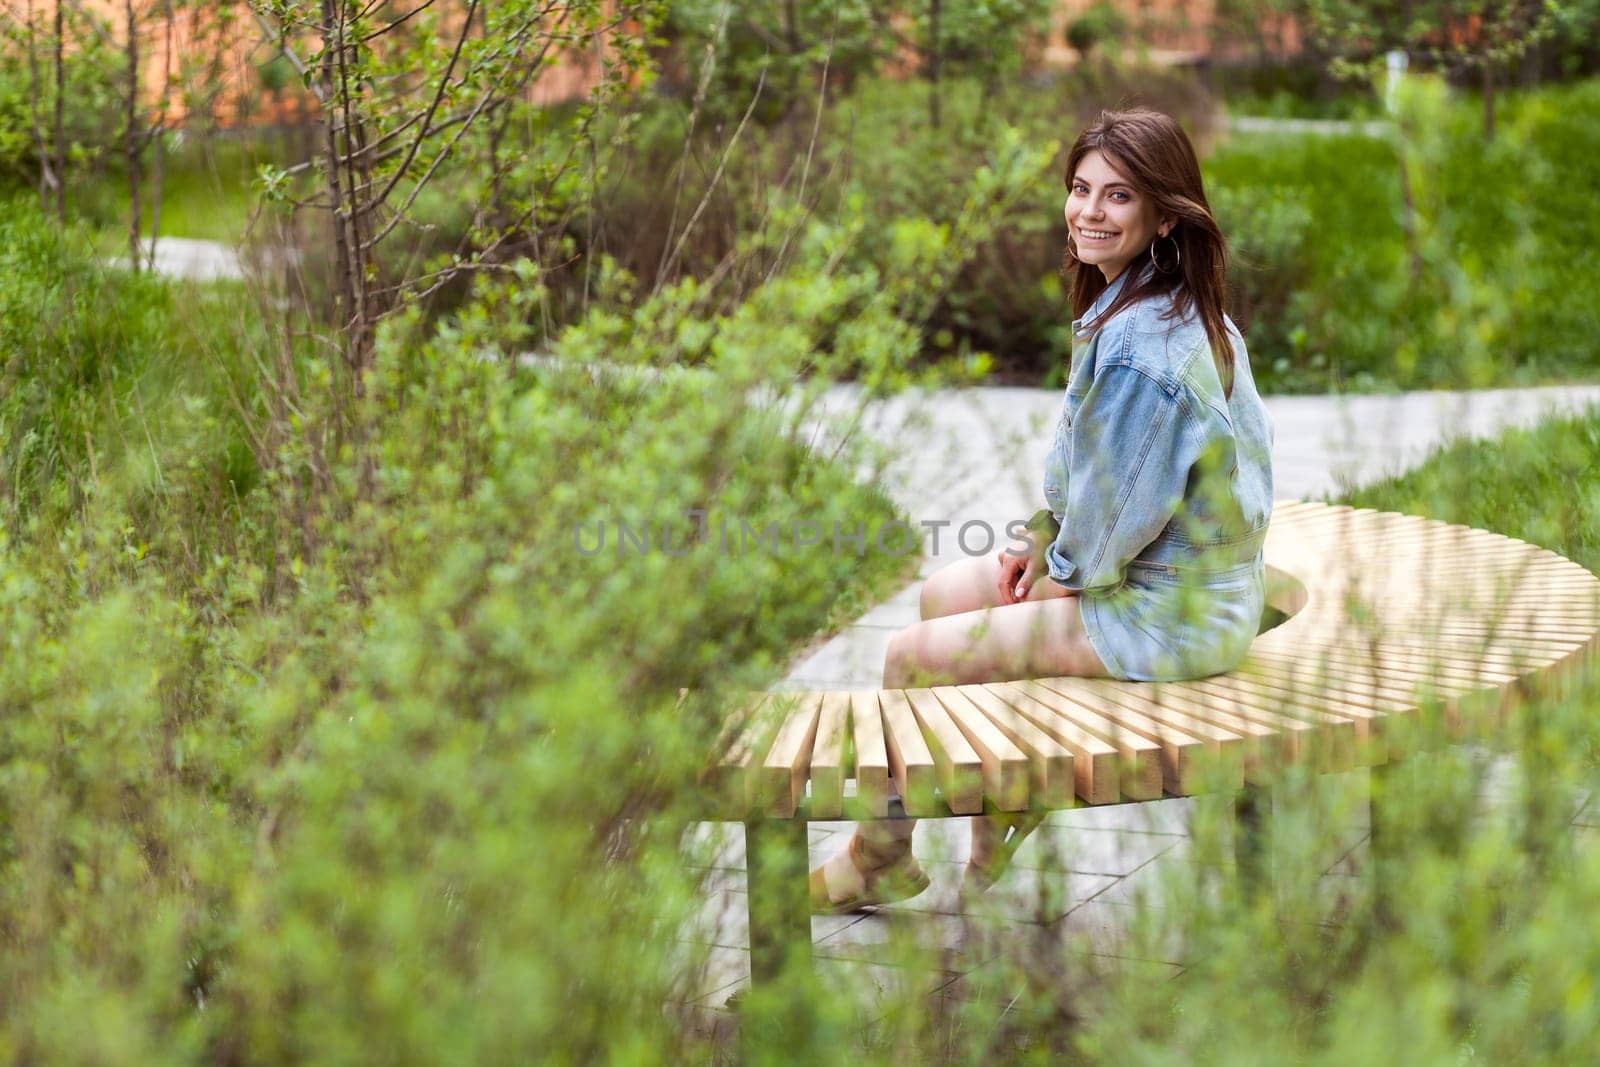 Beautiful woman sitting on wooden bench in green park, looking at camera with toothy smile, by Khosro1